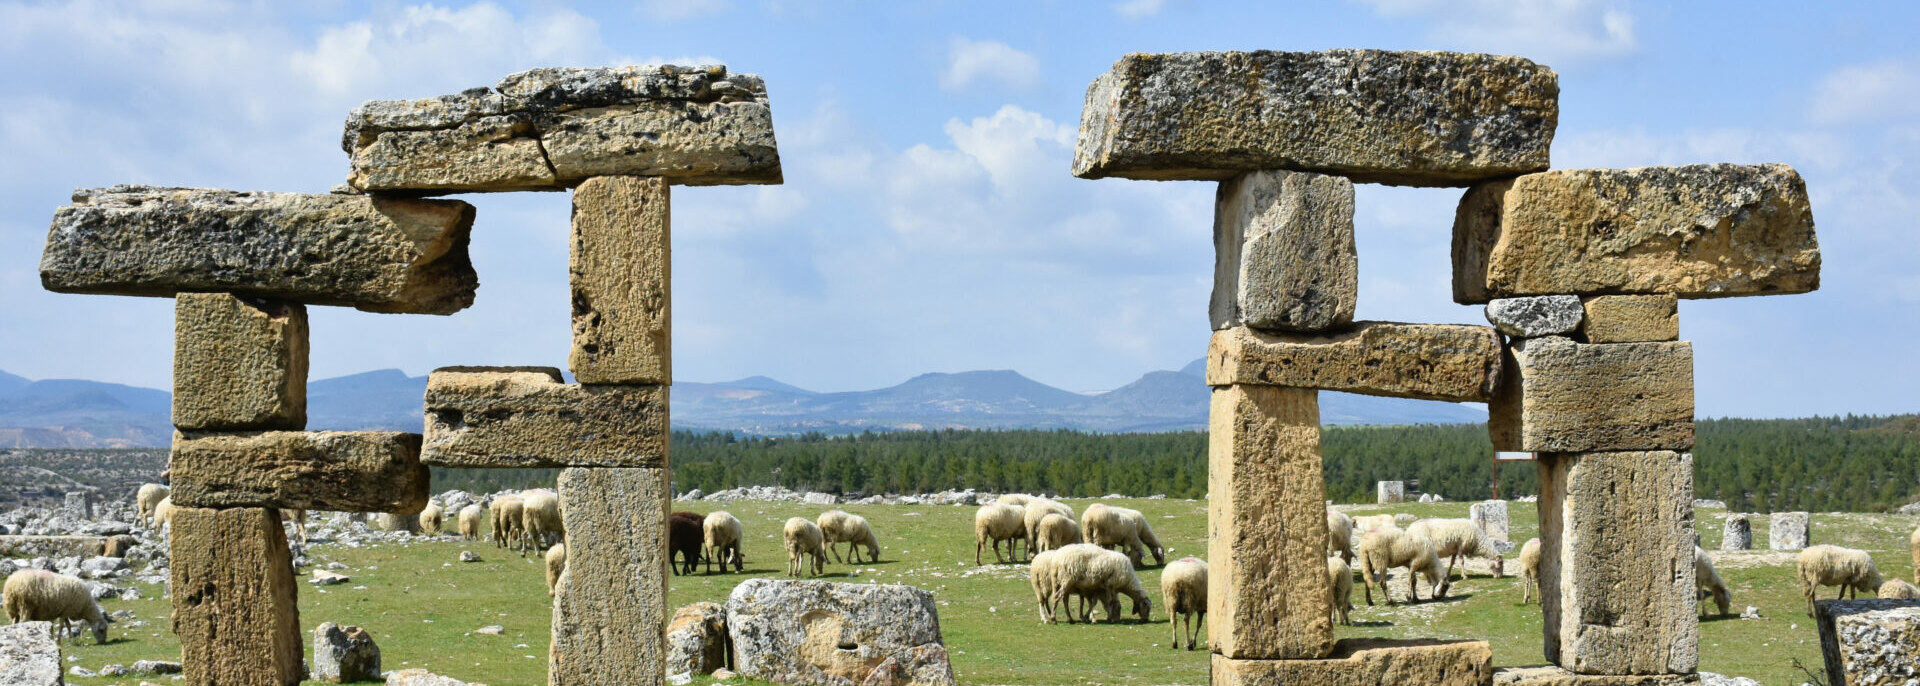 Big rectangular stones balanced at the gate fro the Blaundos archeological site in Turkey